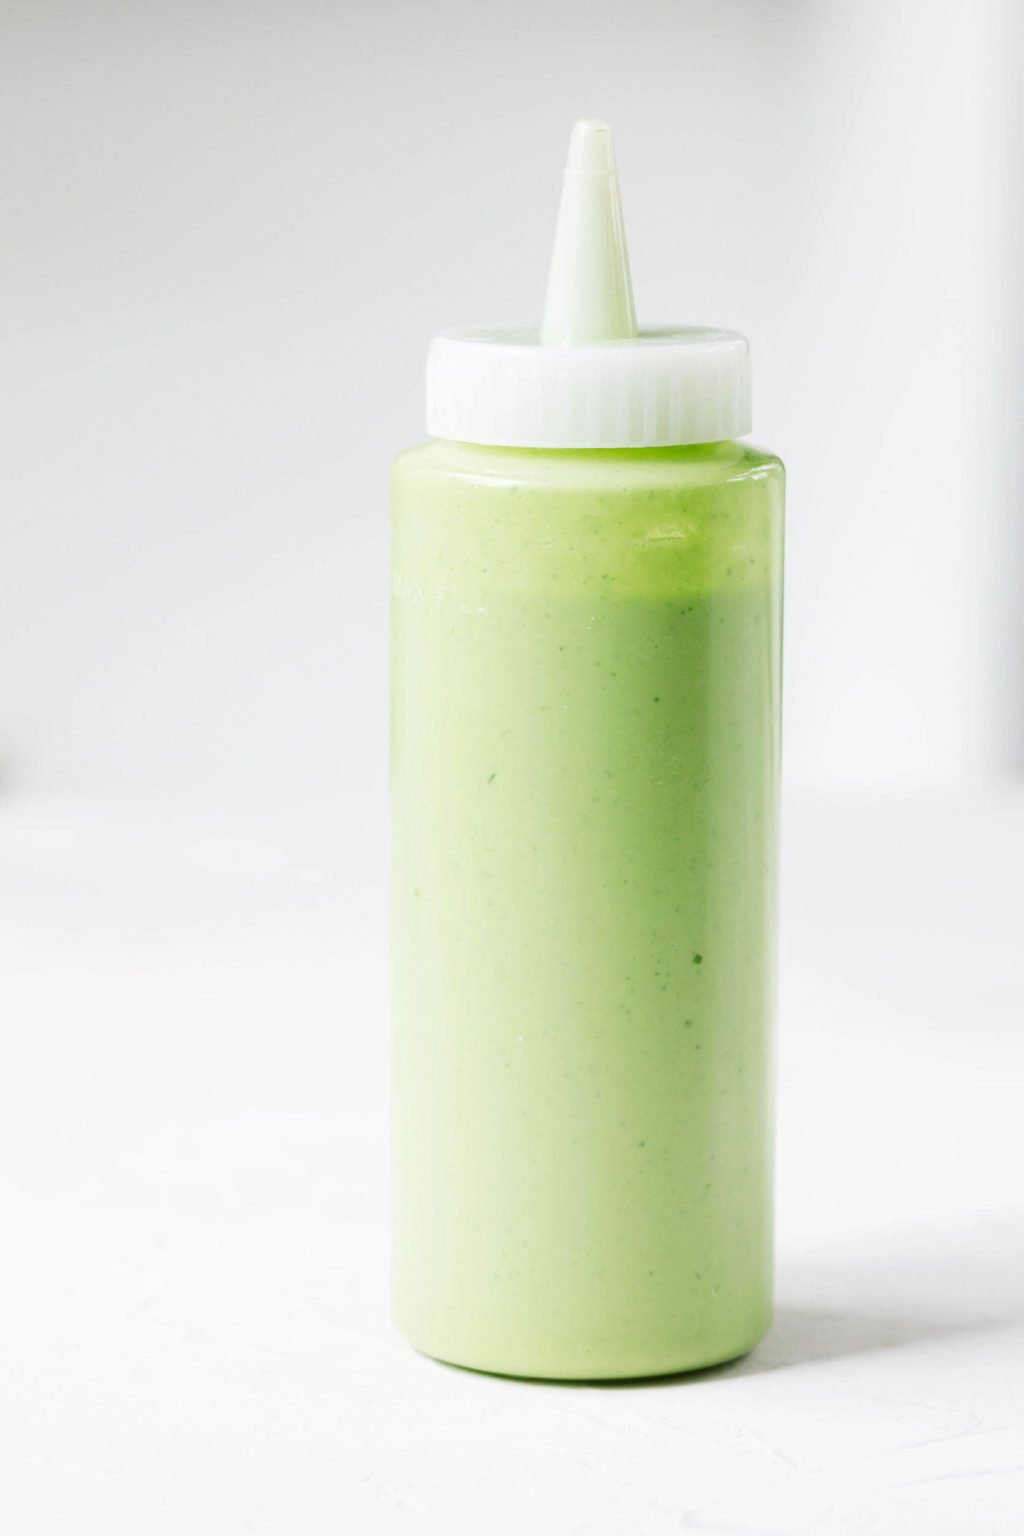 A plastic squeeze bottle holds a pale green sauce. It is pictured against a white background.